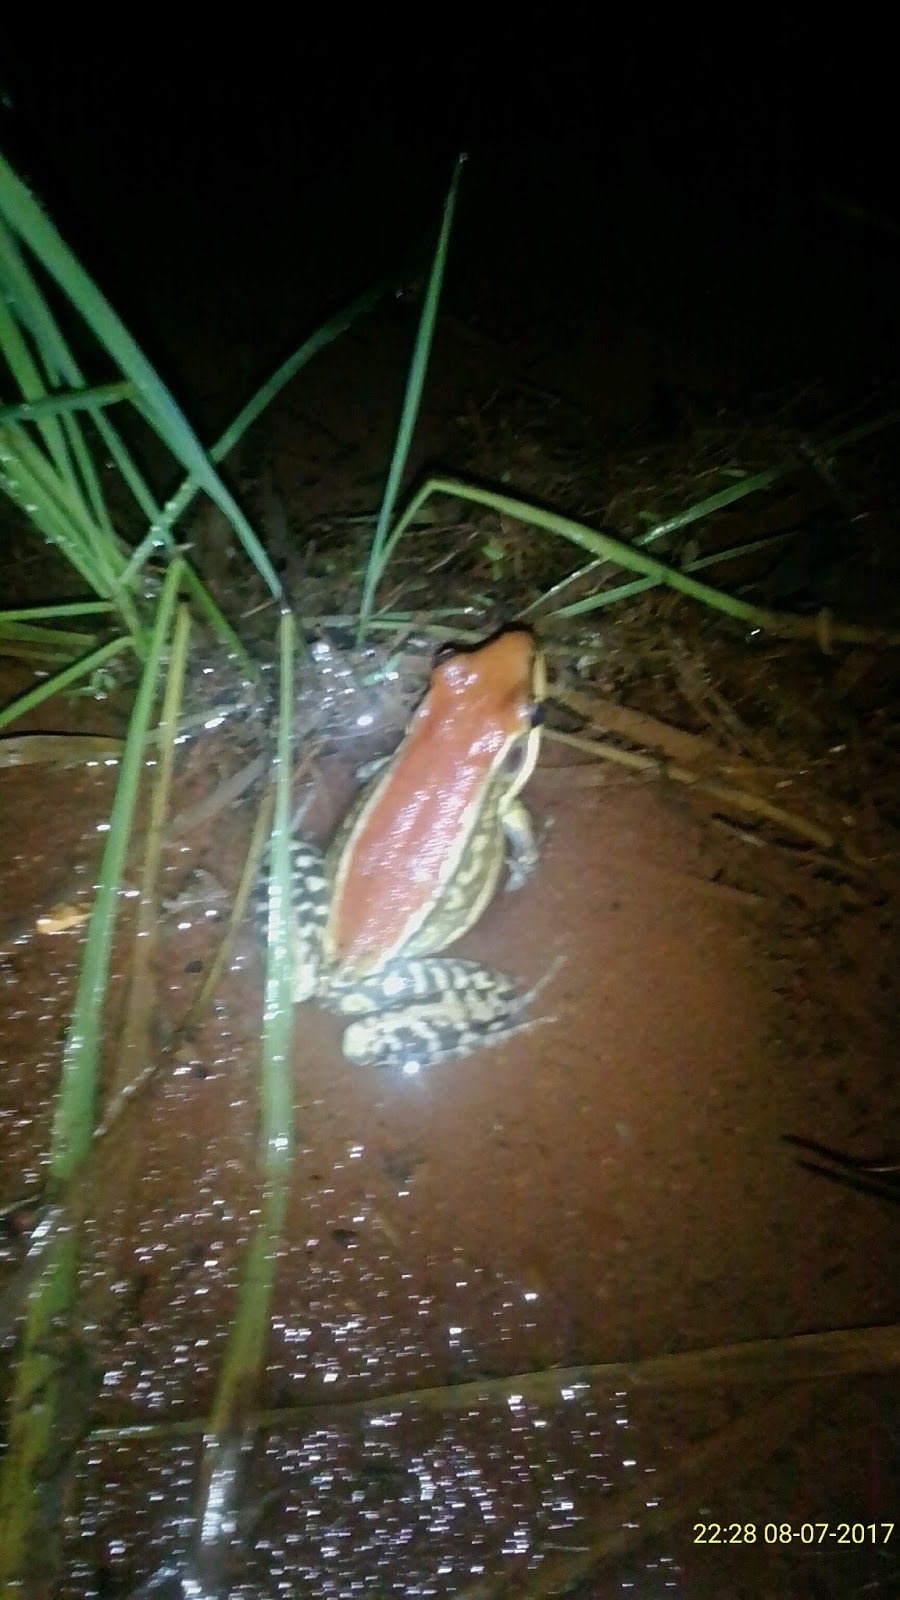 Another kind of frog